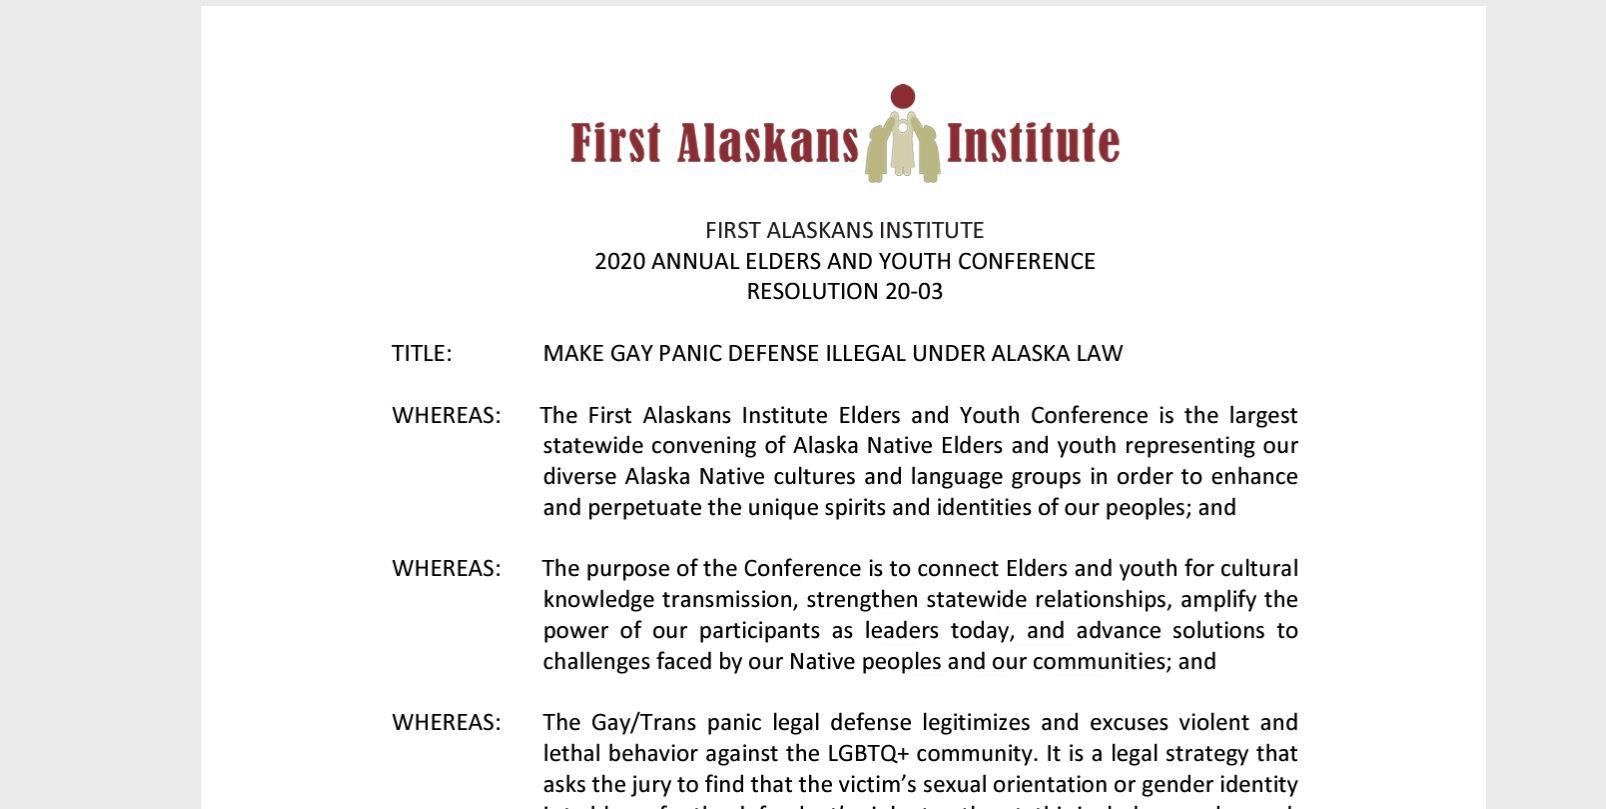 First Alaskans Institute 2020 Annual Elders and Youth Conference Resolution 20-03 